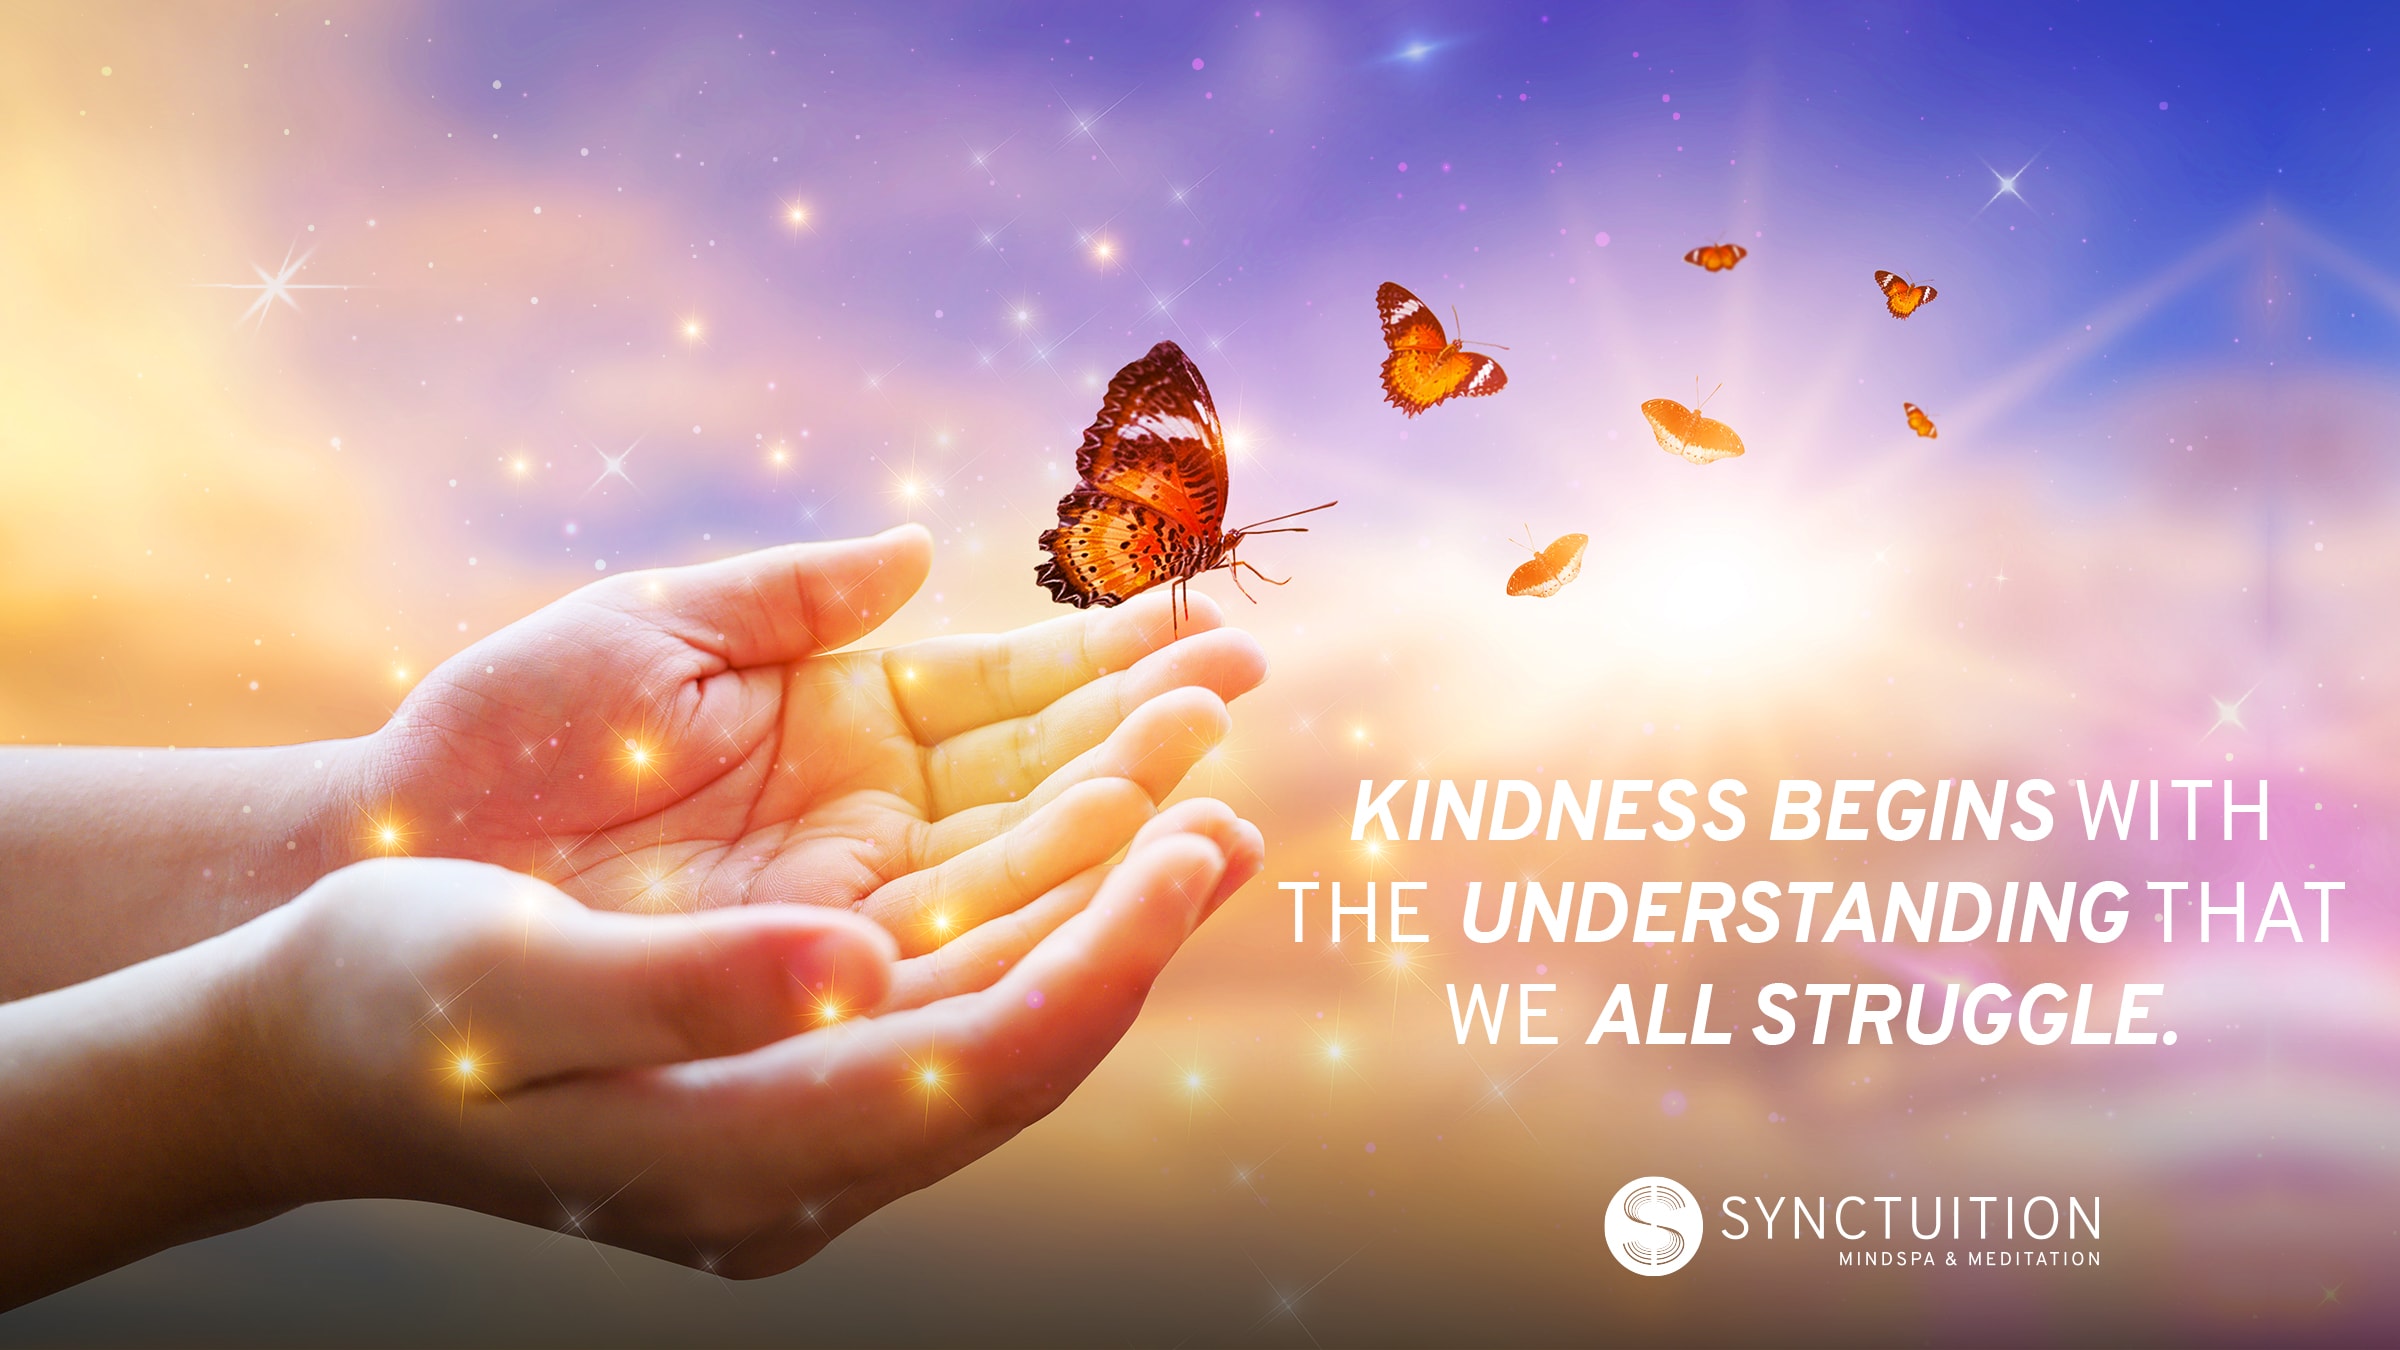 Kindness begins with the understanding that we all struggle. 